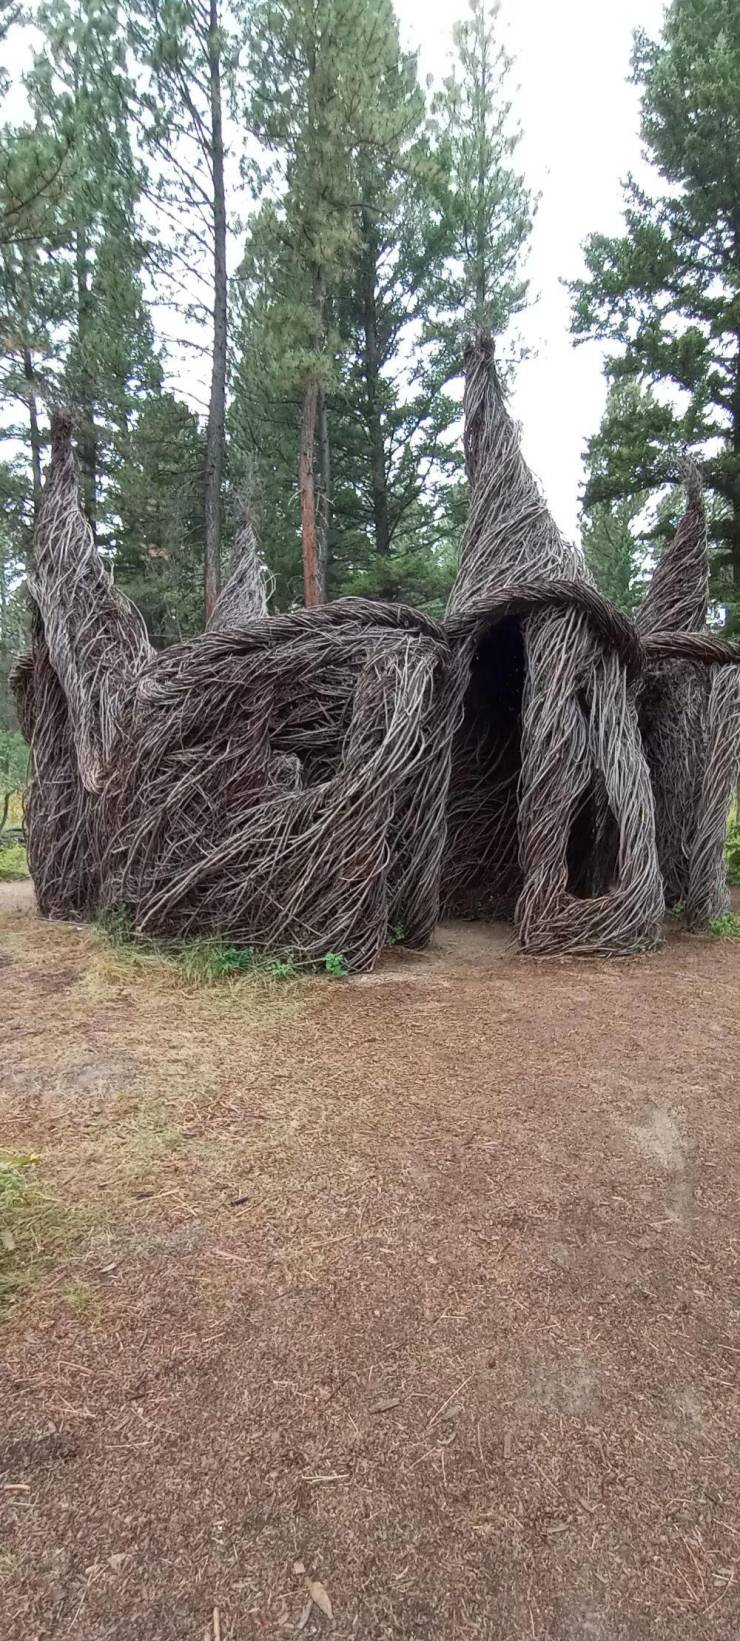 “A weird house made entirely out of tree branches.”